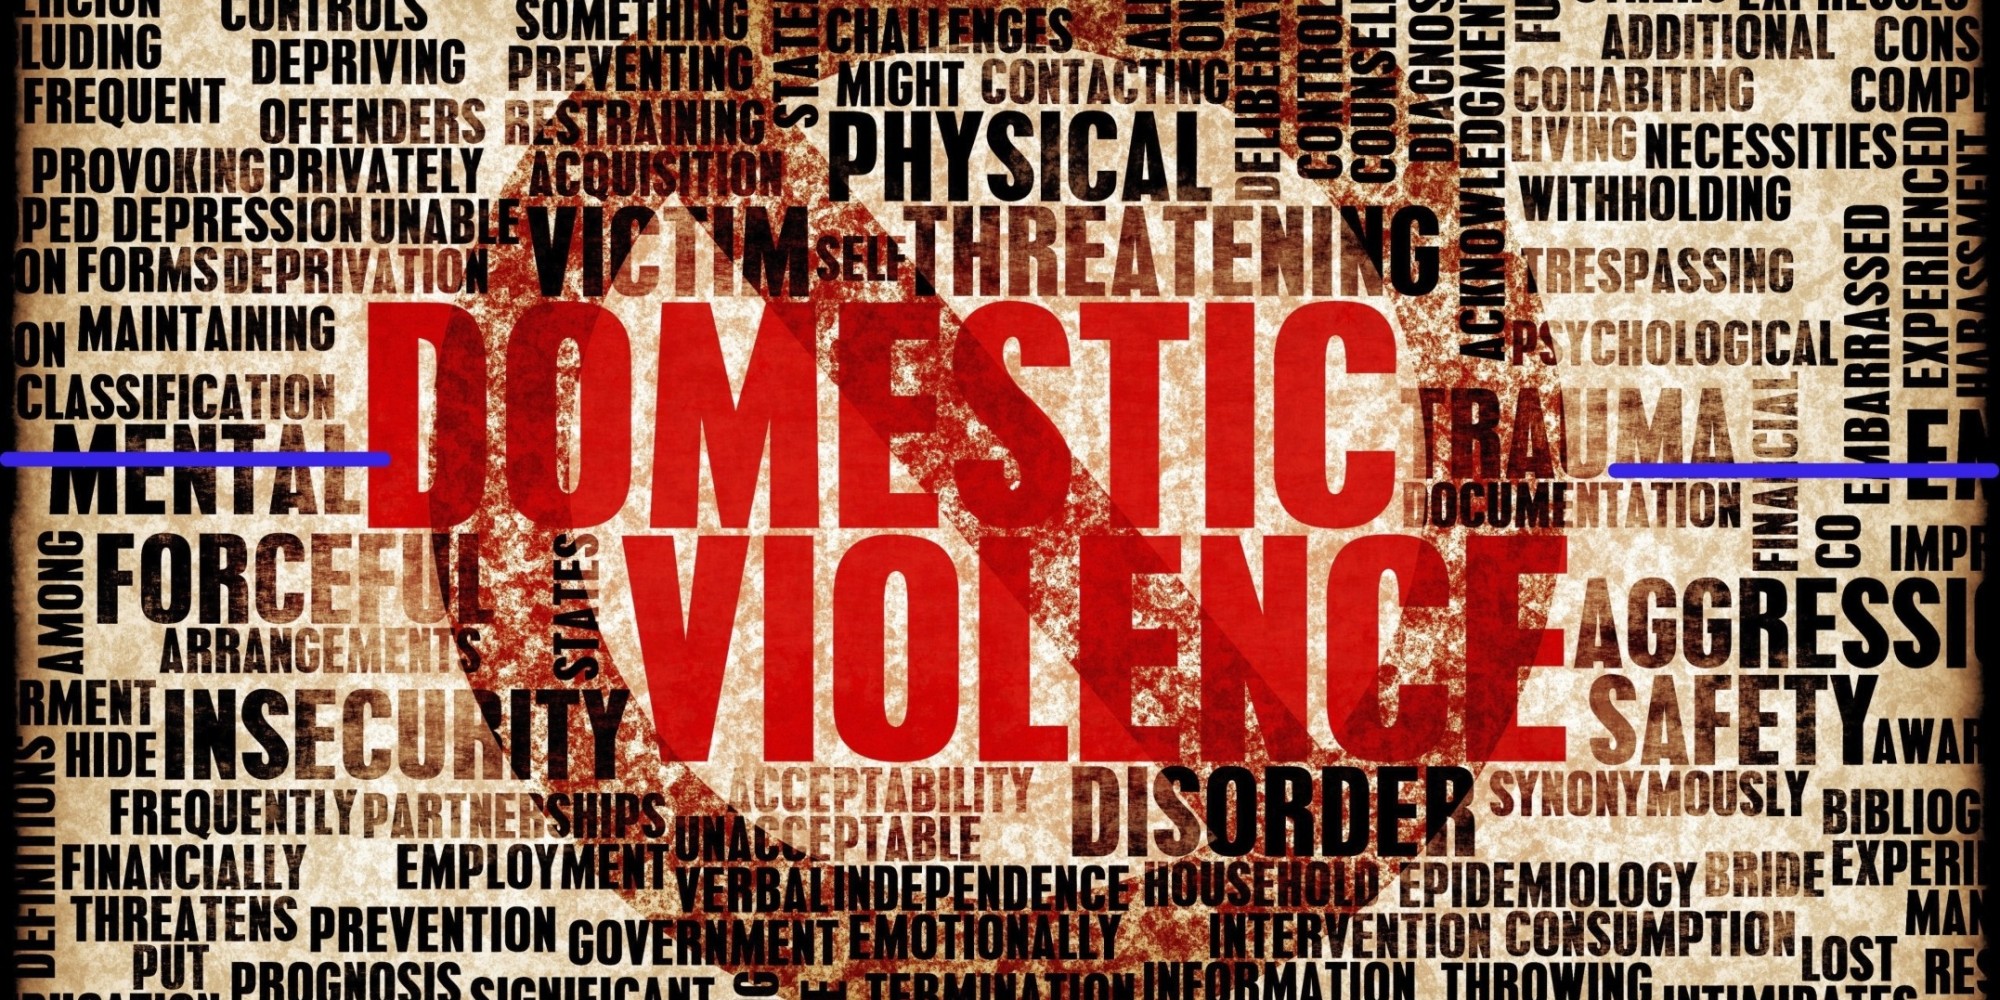 Opinion: Domestic Violence and Feminists’ Intervention